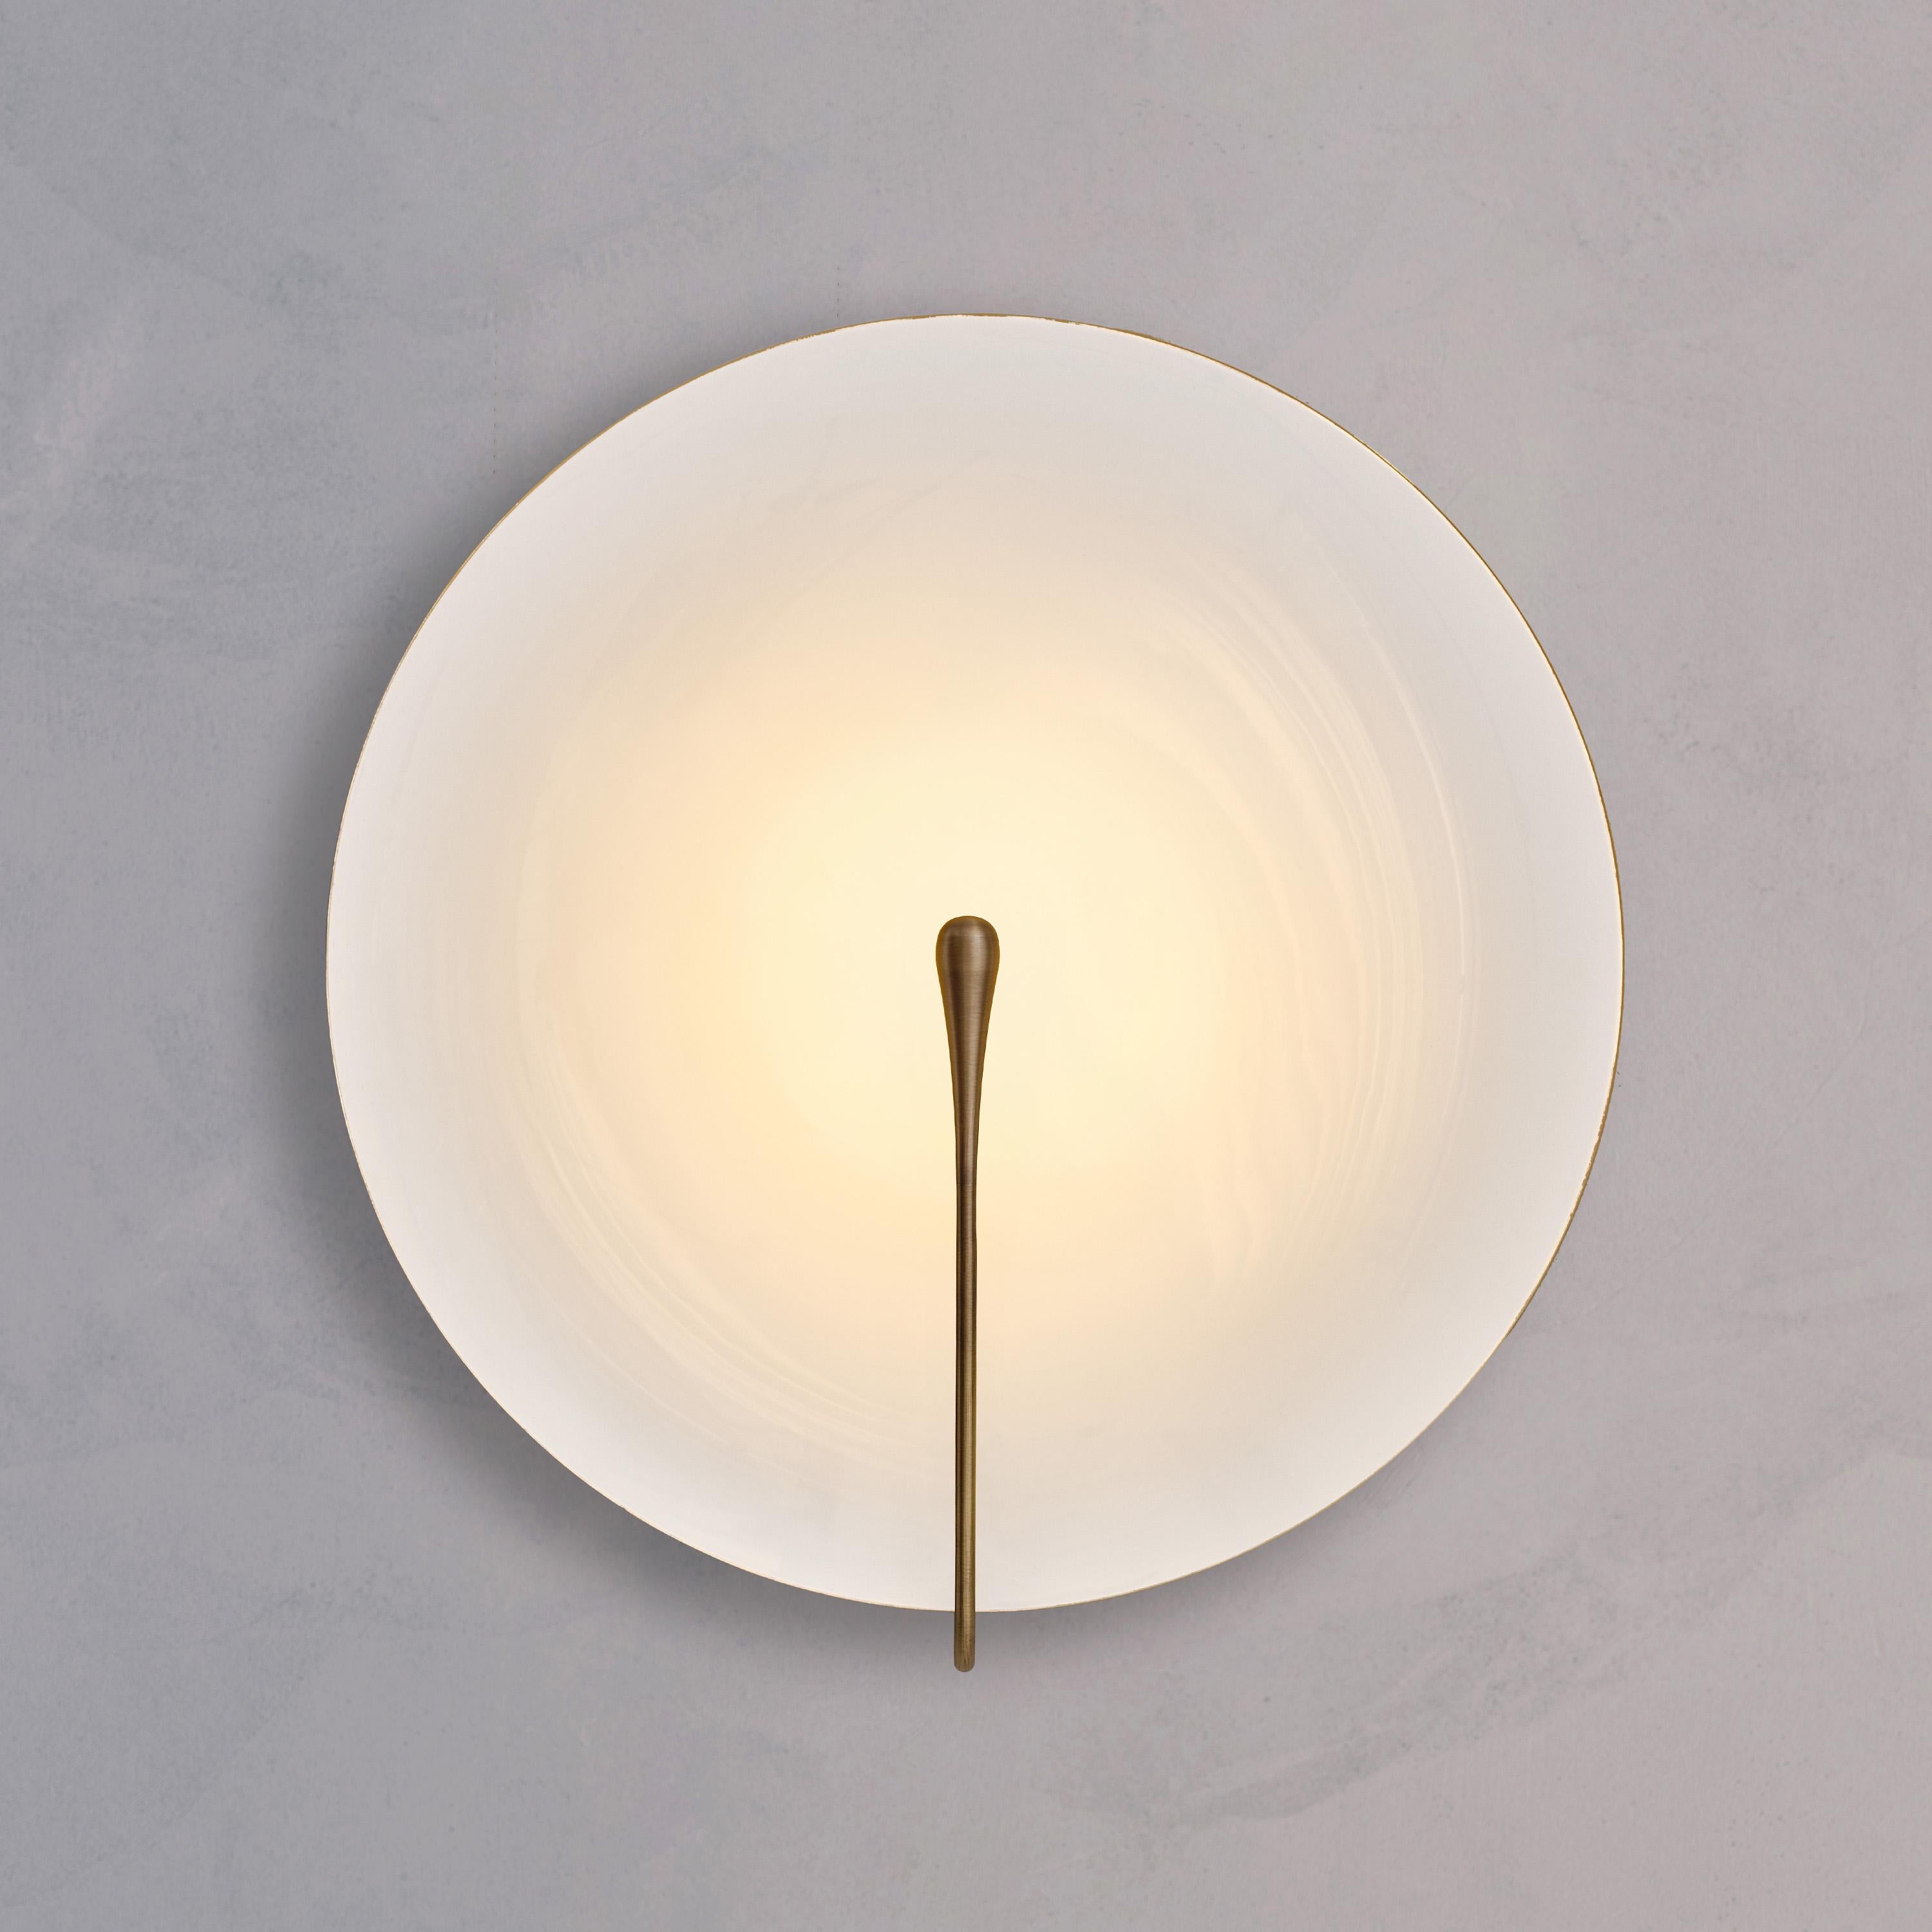 Inspired by the beautiful textures of nature, The rim and the back of the shade are finished in satin brass, whilst the inner surface is hand-lacquered in a gloss or matt white finish. Please note that each piece is individually handmade, therefore